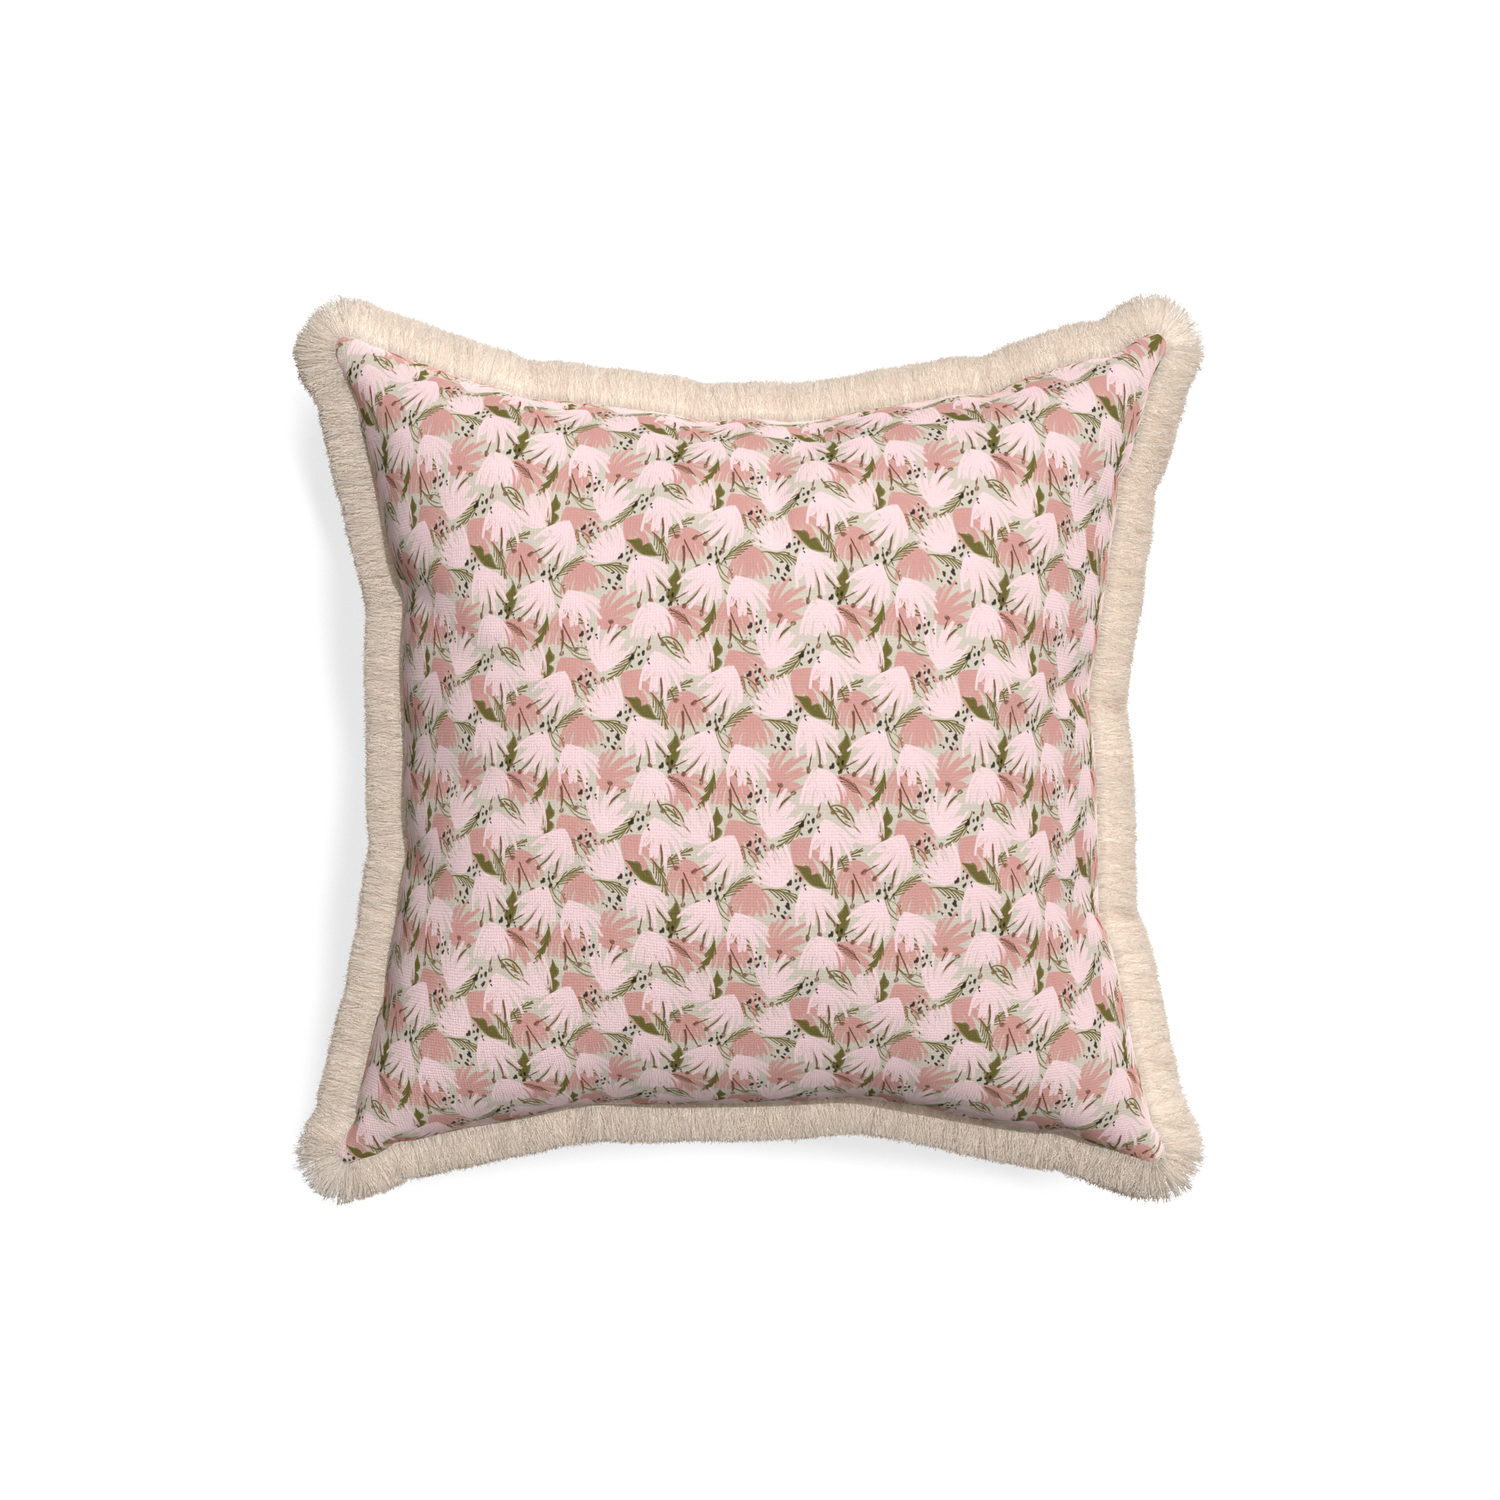 18-square eden pink custom pink floralpillow with cream fringe on white background